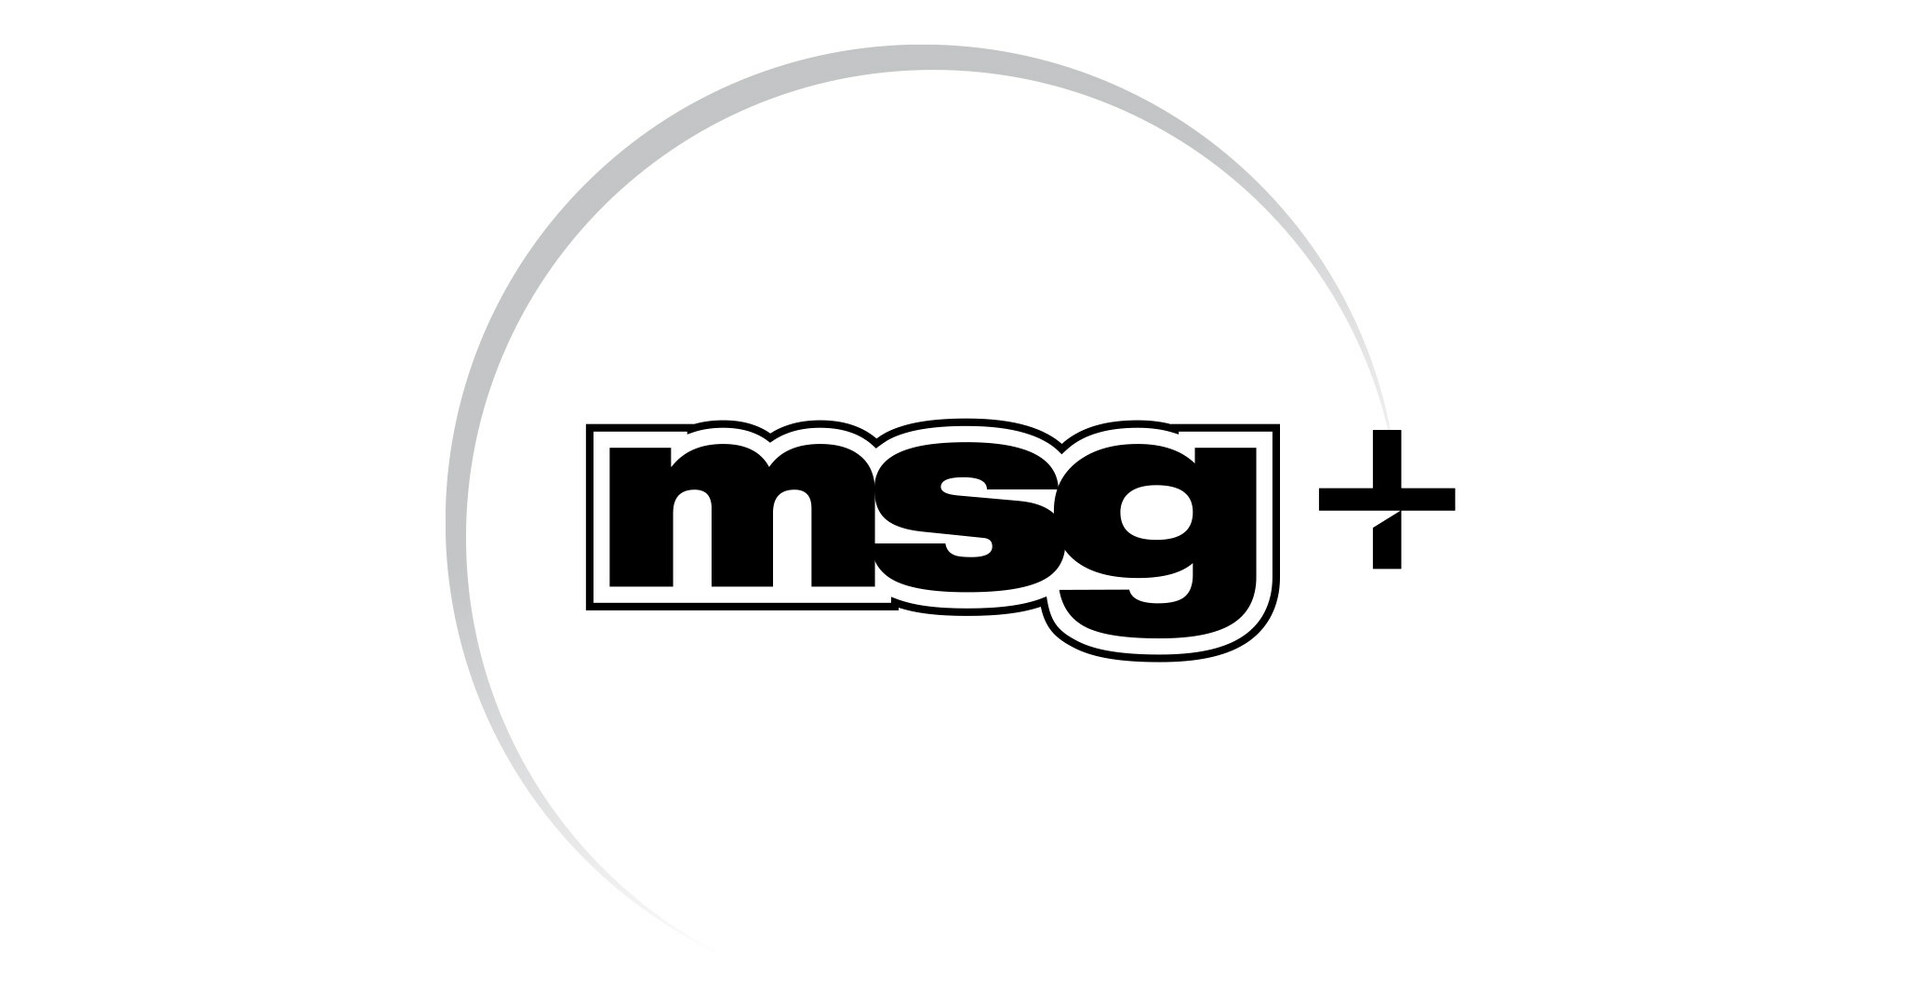 MSGNetworks.com - Official Site of MSG Networks